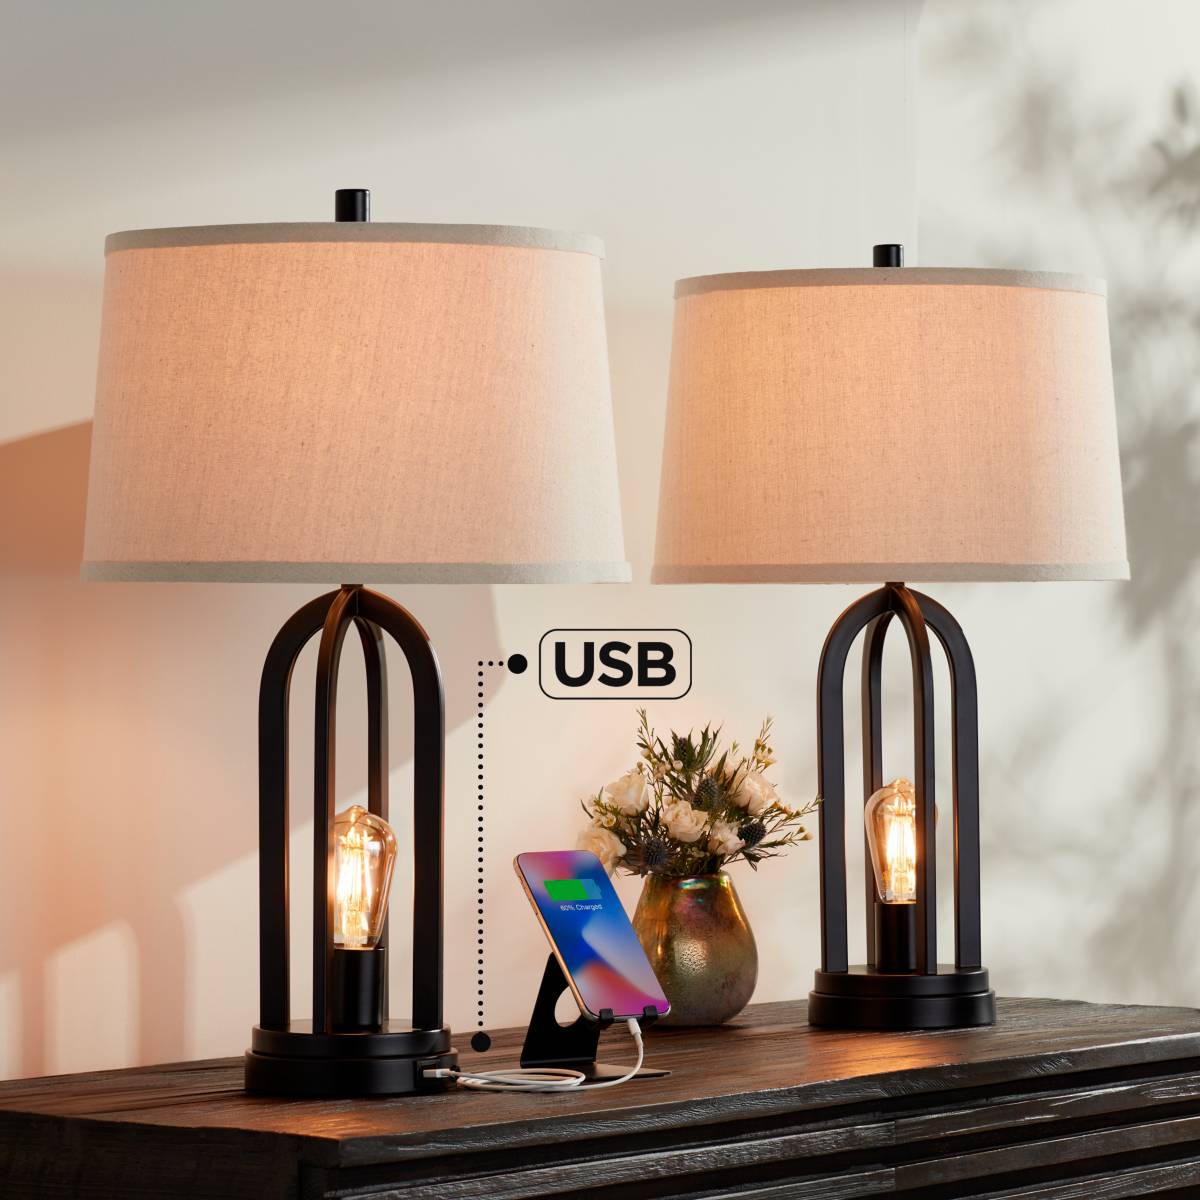 Usb Table Lamps Featuring Built In, Bedroom End Table Lamps With Usb Ports